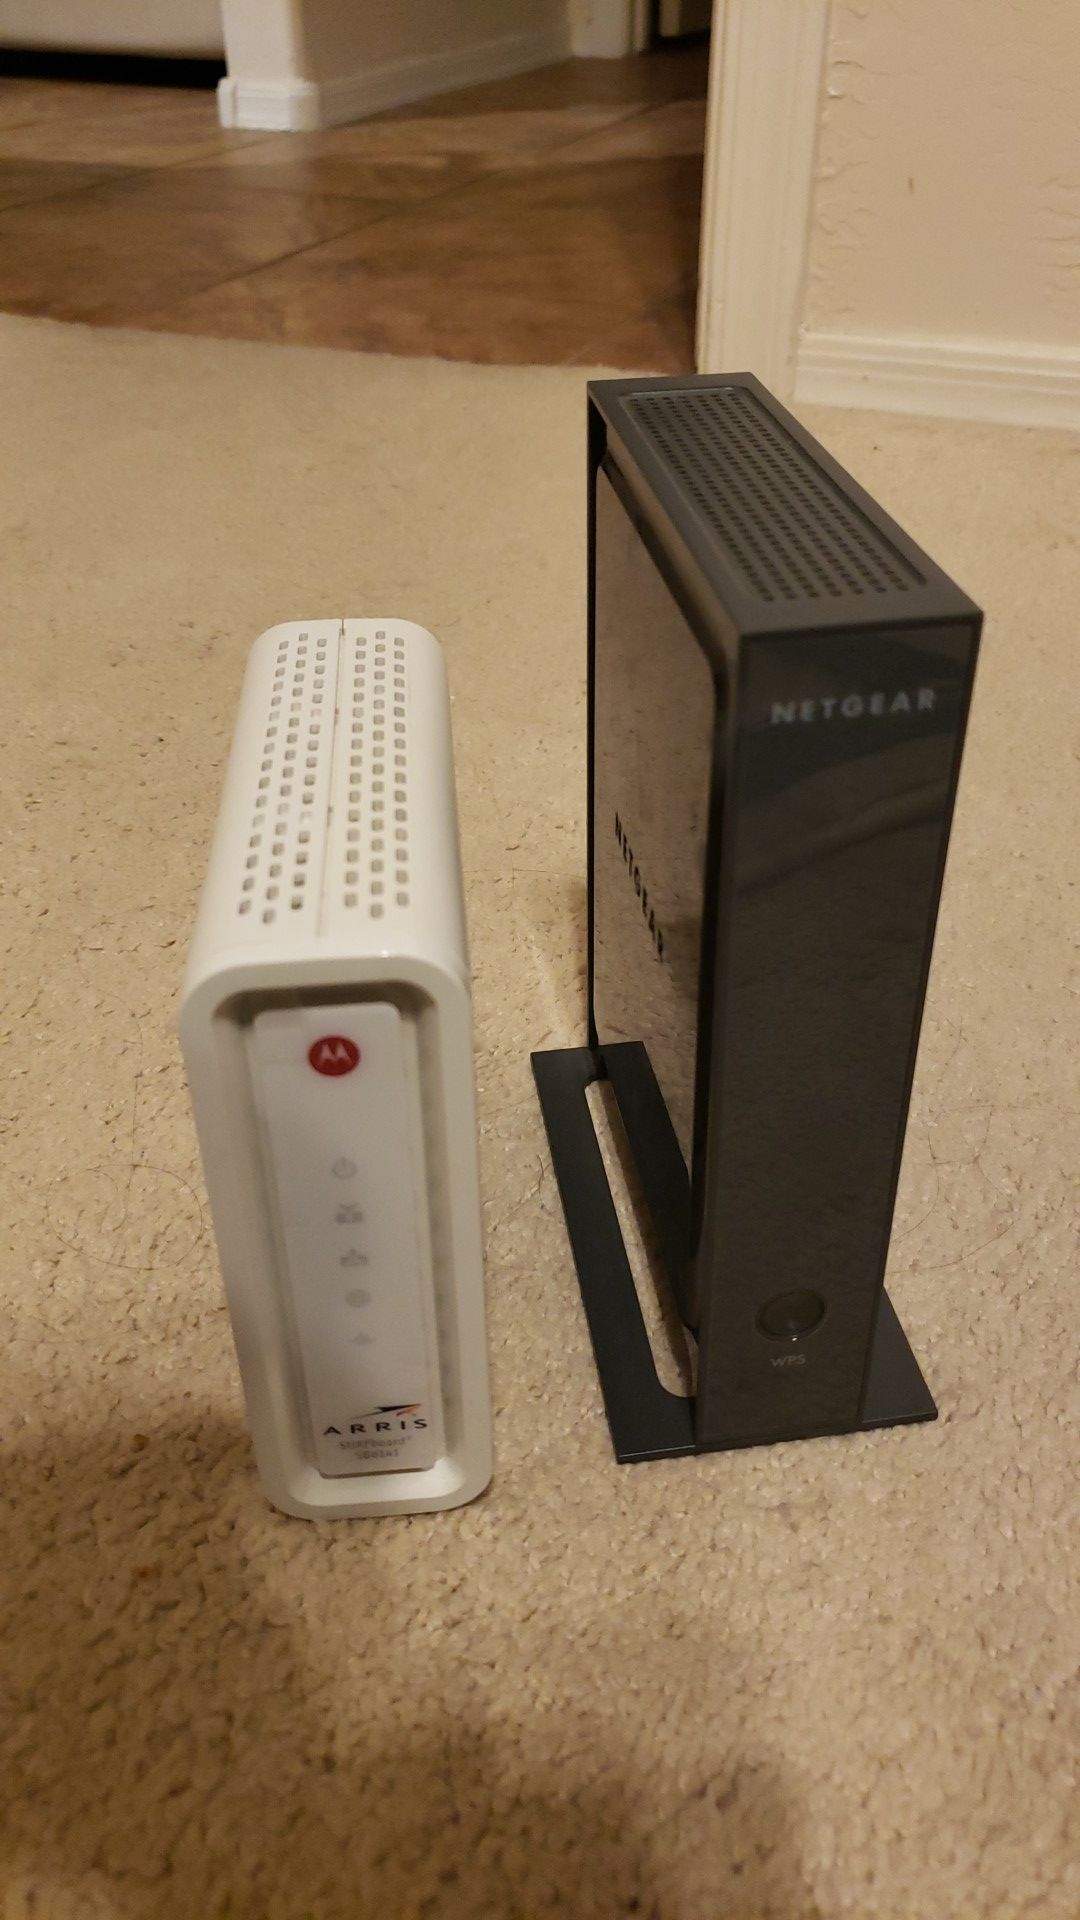 Cable modem & wifi router